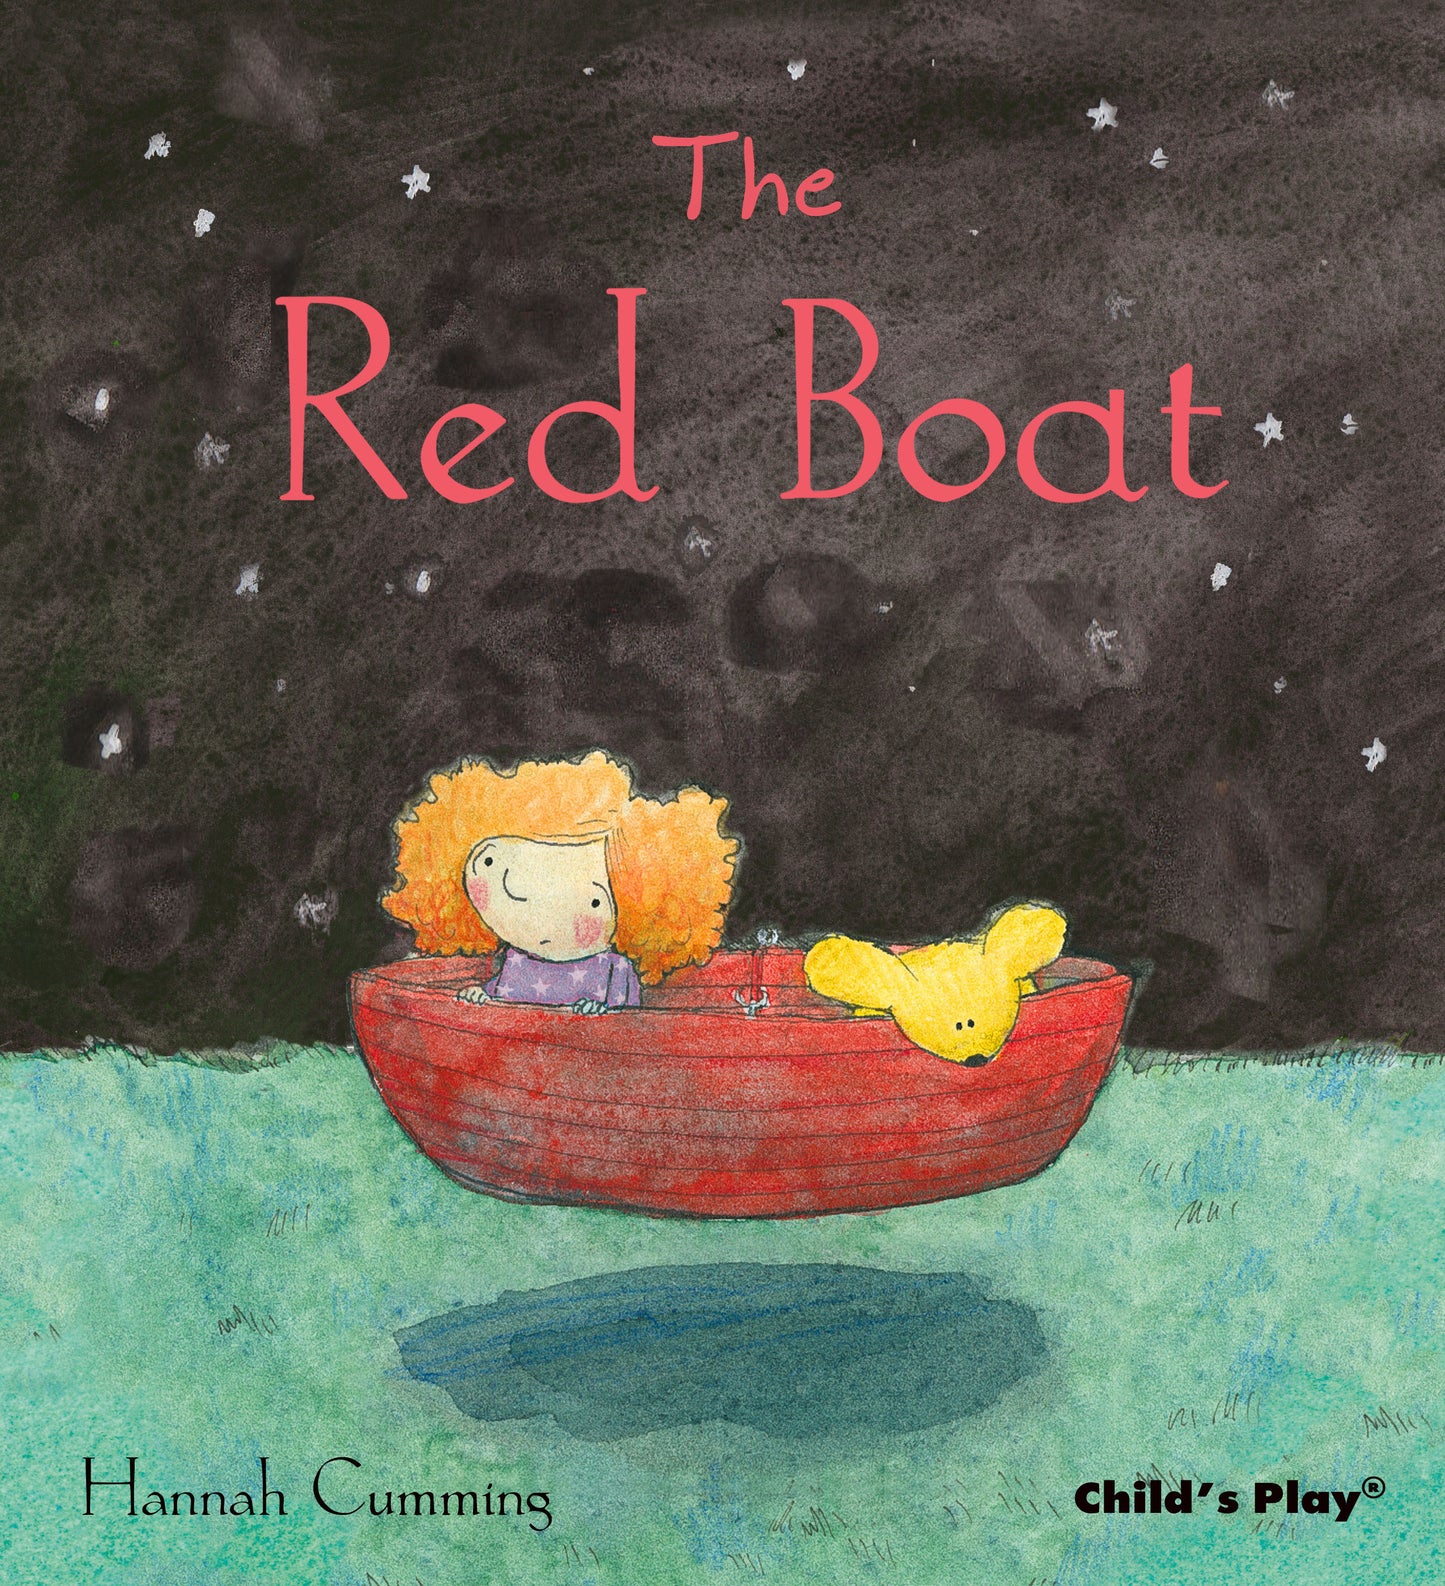 The Red Boat (Softcover Edition)